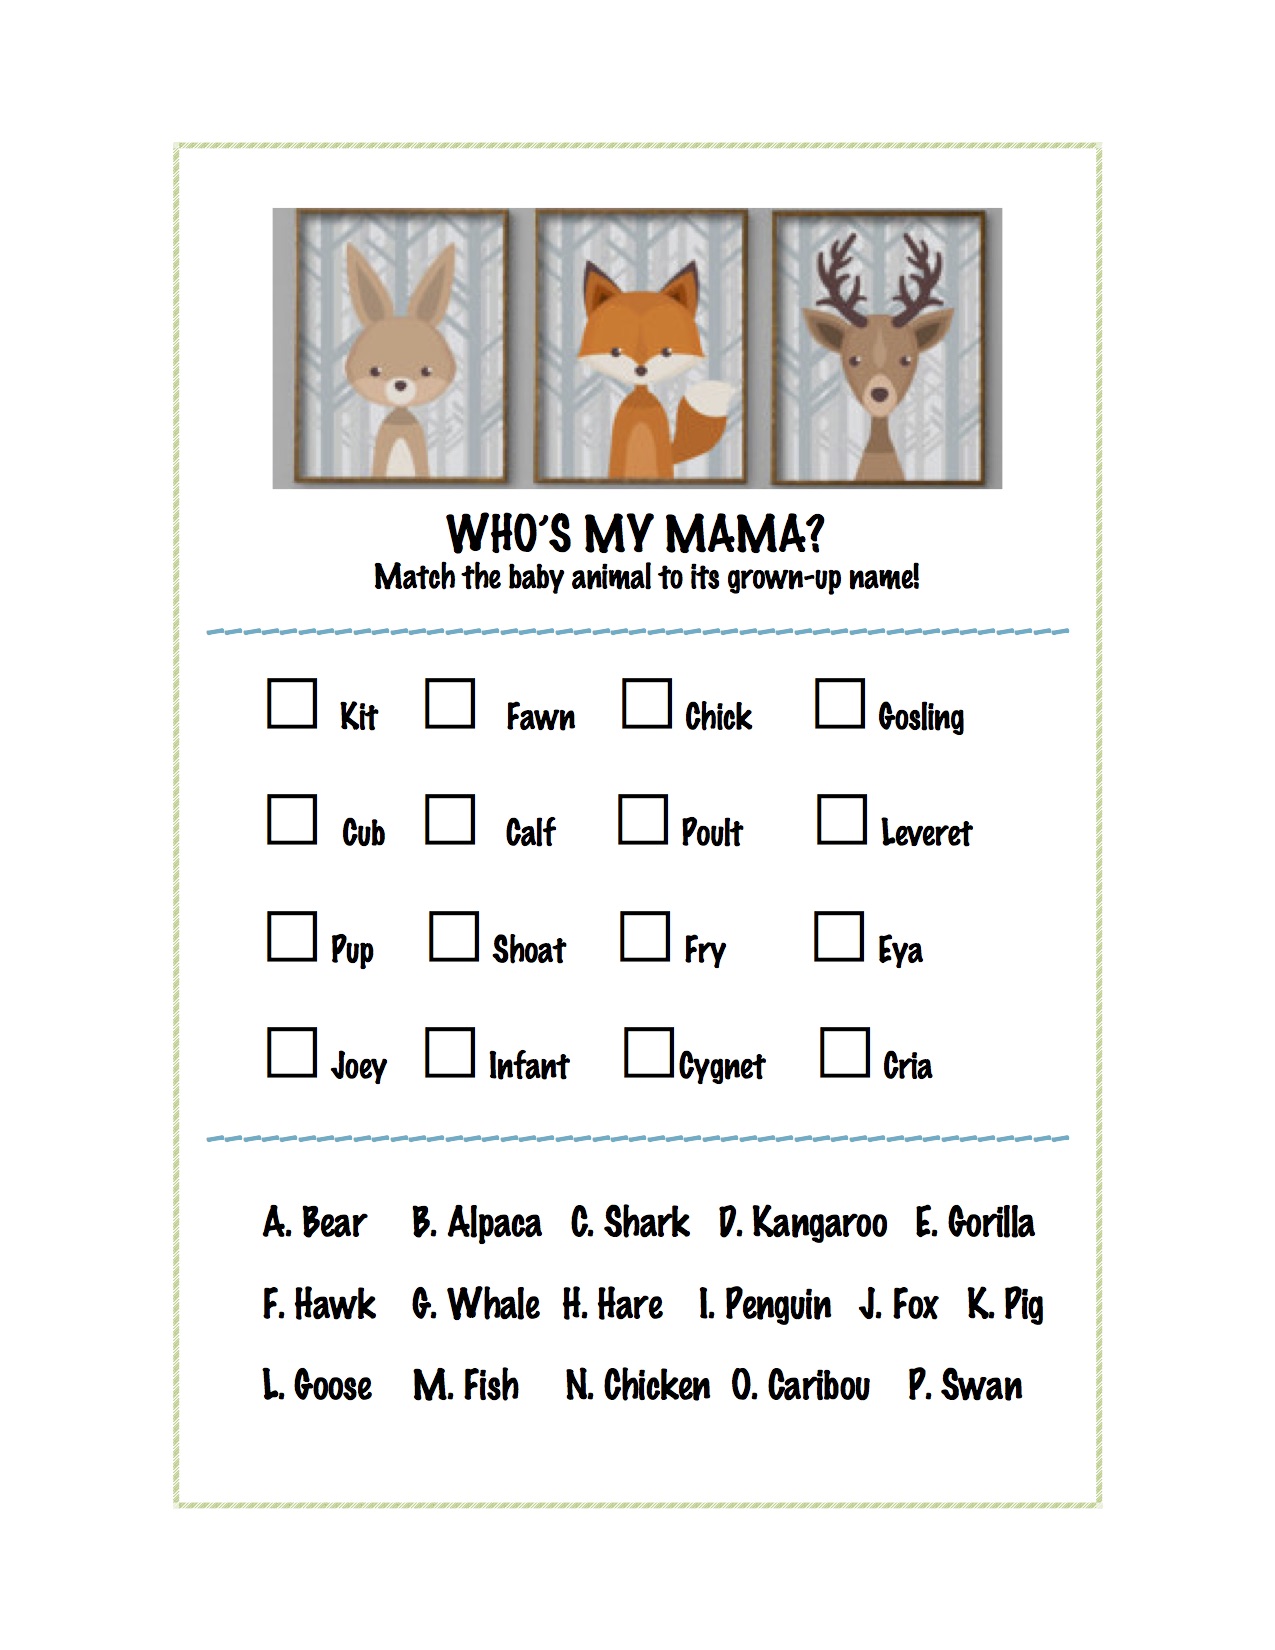 baby-animal-names-game-free-printable - A Love Letter To Food